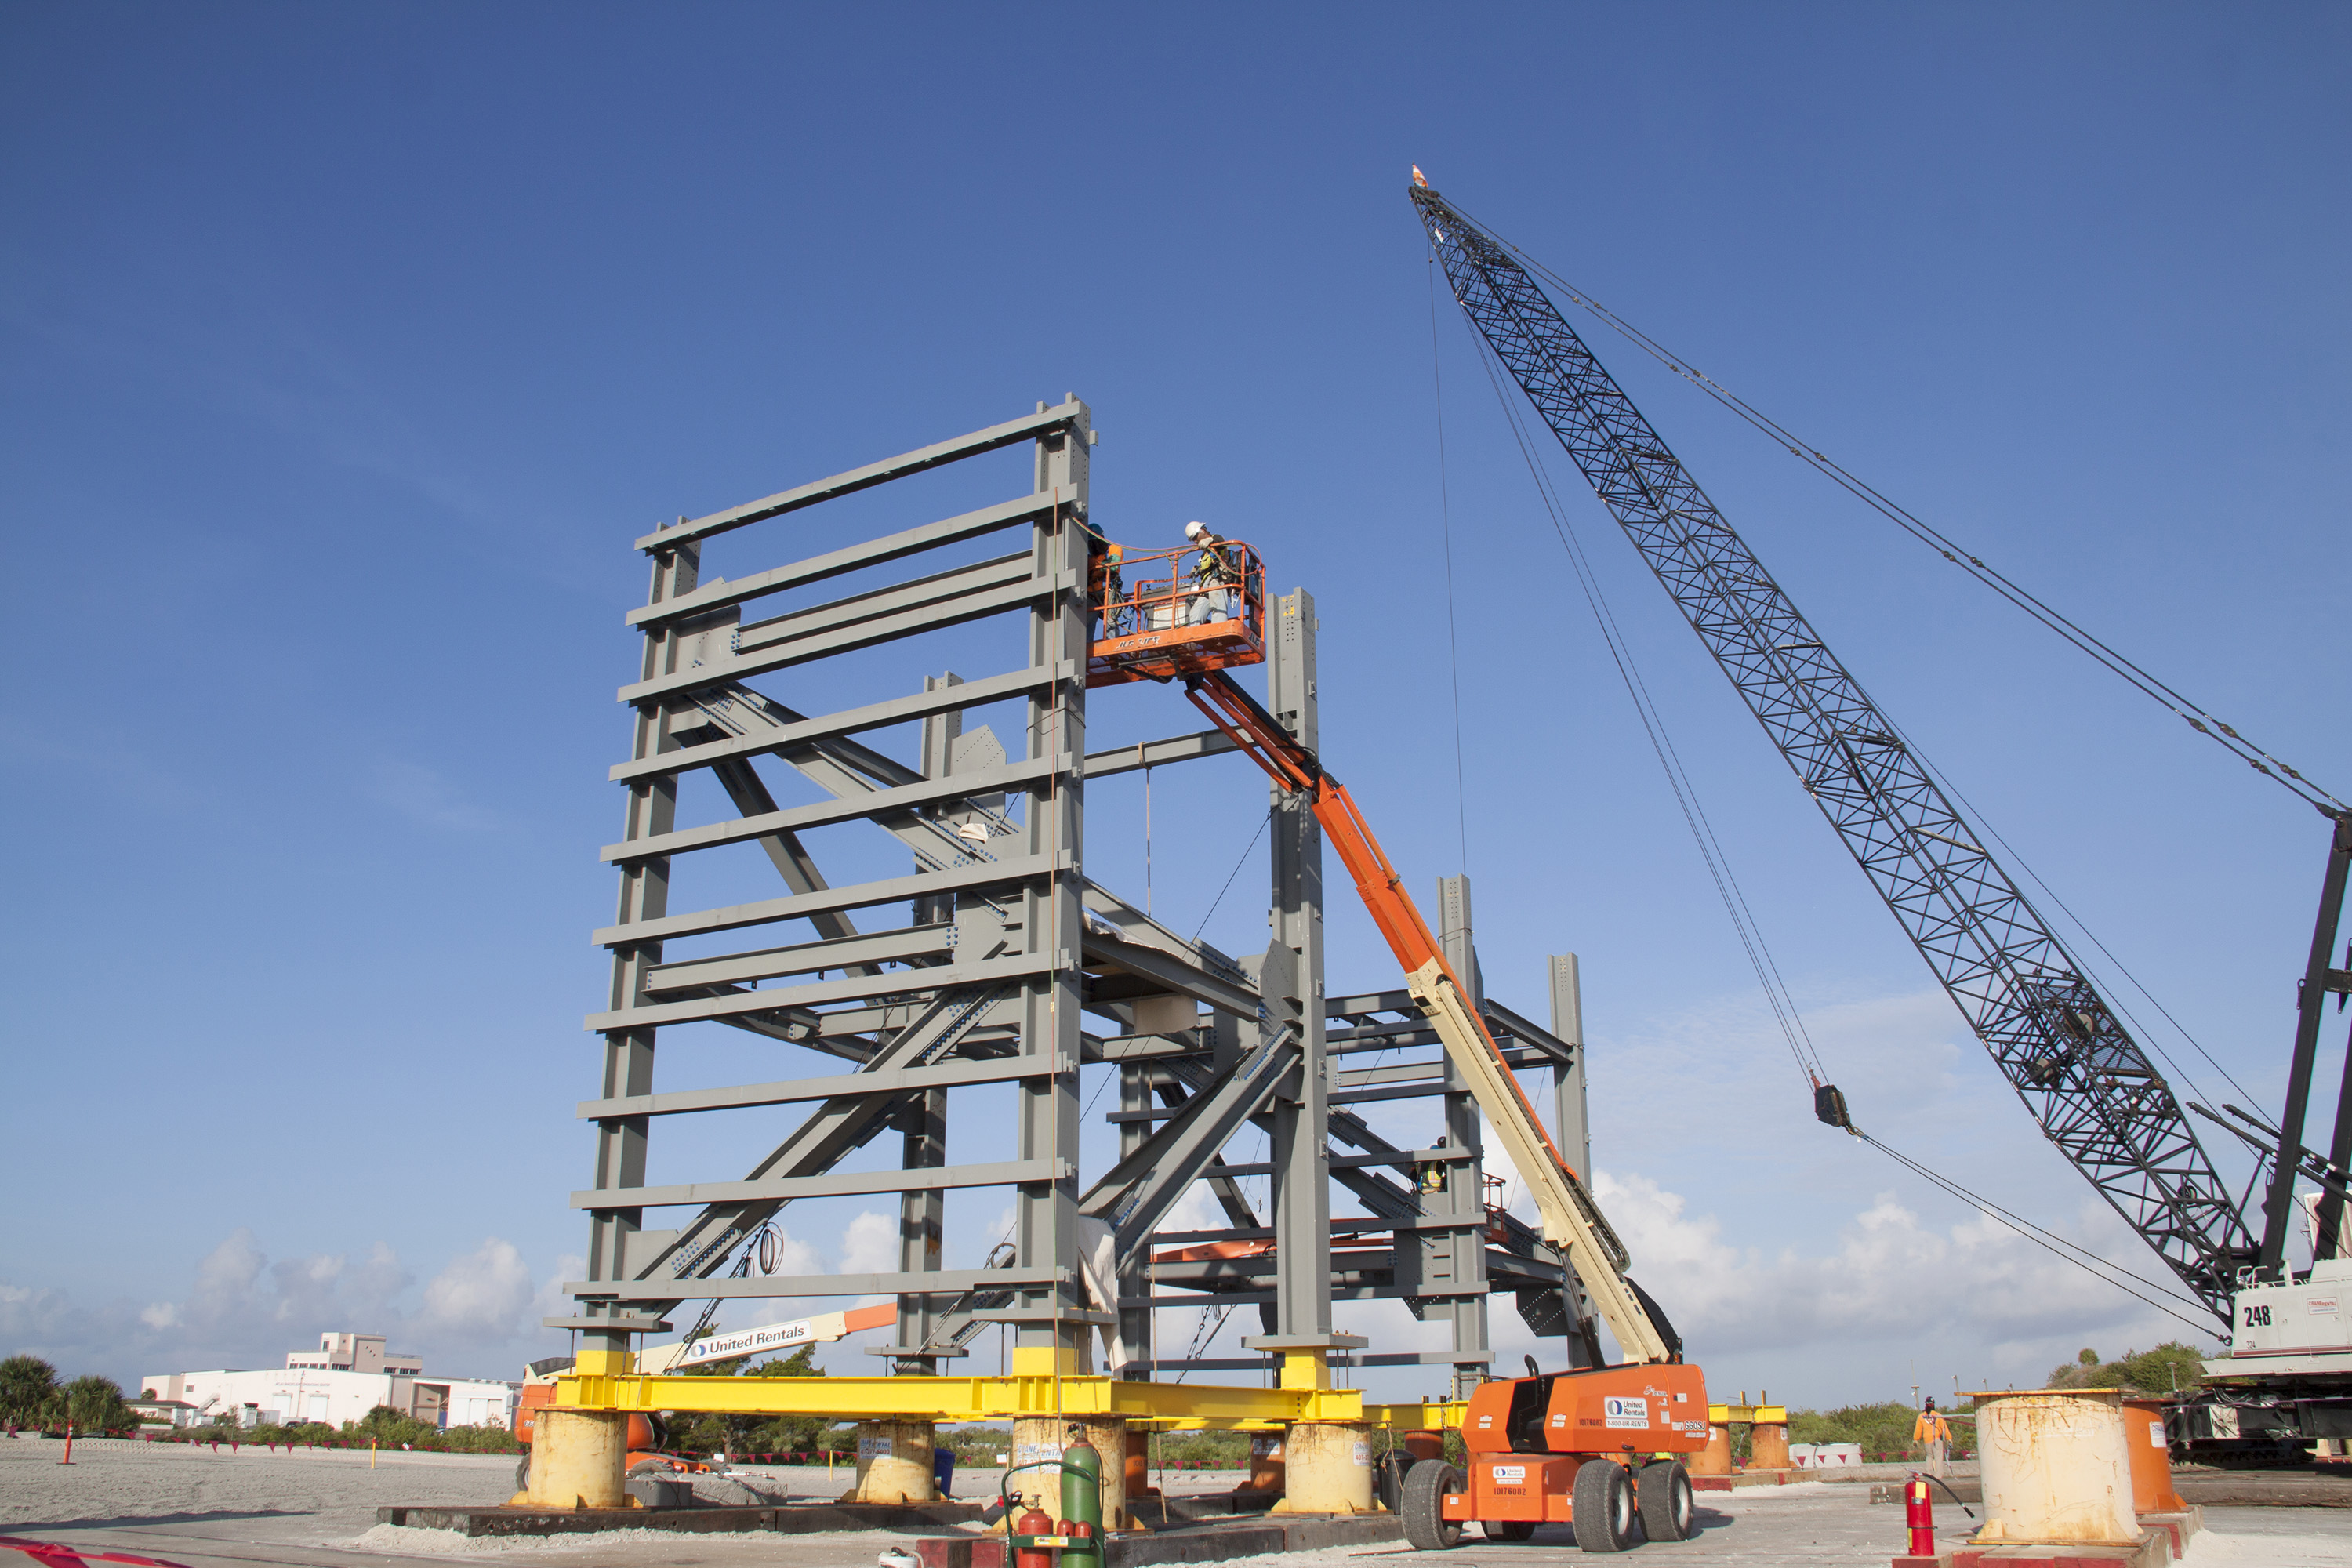 The first crew access tower tiers begin to take shape at Space Launch Complex-41 for flights aboard the Boeing CST-100. Credits: NASA/Cory Huston